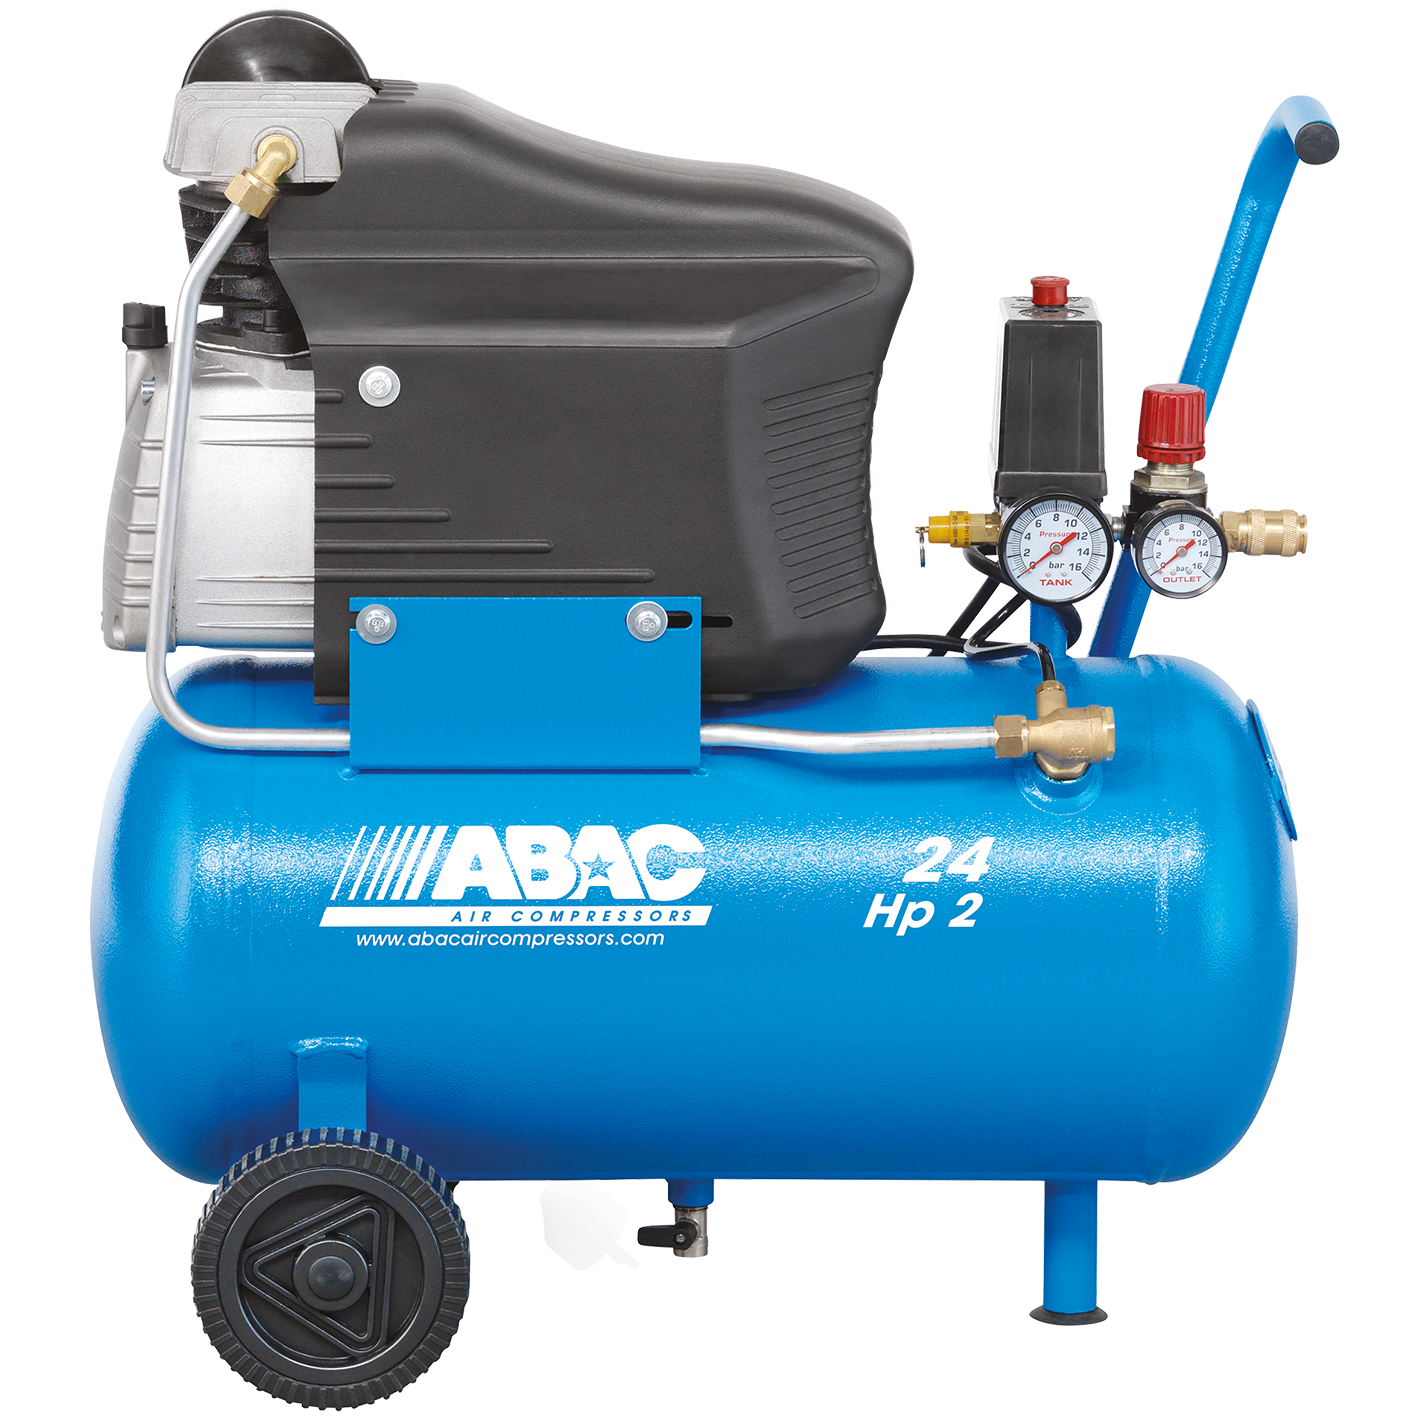 Suppliers of Direct Drive Compressors UK